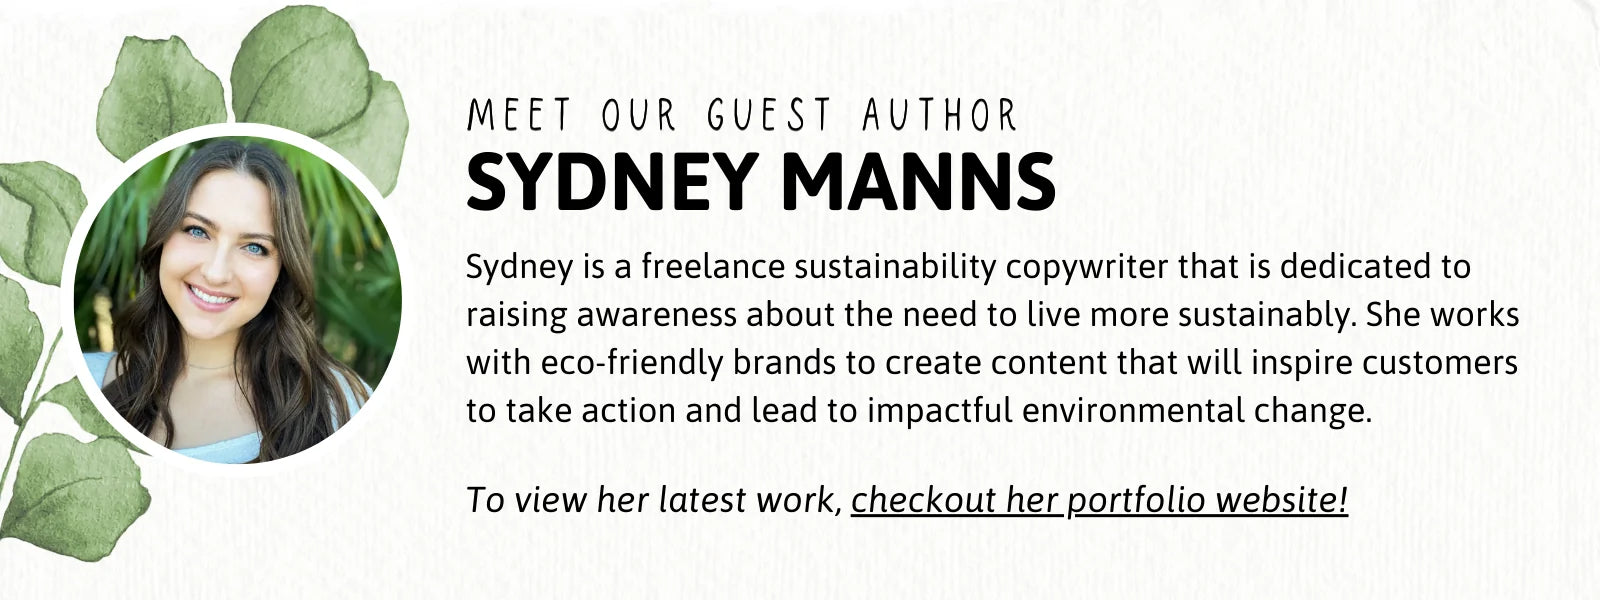 Meet our guest author, Sydney Manns! Sydney is a freelance sustainability copywriter that is dedicated to raising awareness about the need to live more sustainably. She works with eco-friendly brands to create content that will inspire customers to take action and lead to impactful environmental change. To view her latest work, checkout her portfolio website by clicking this image!